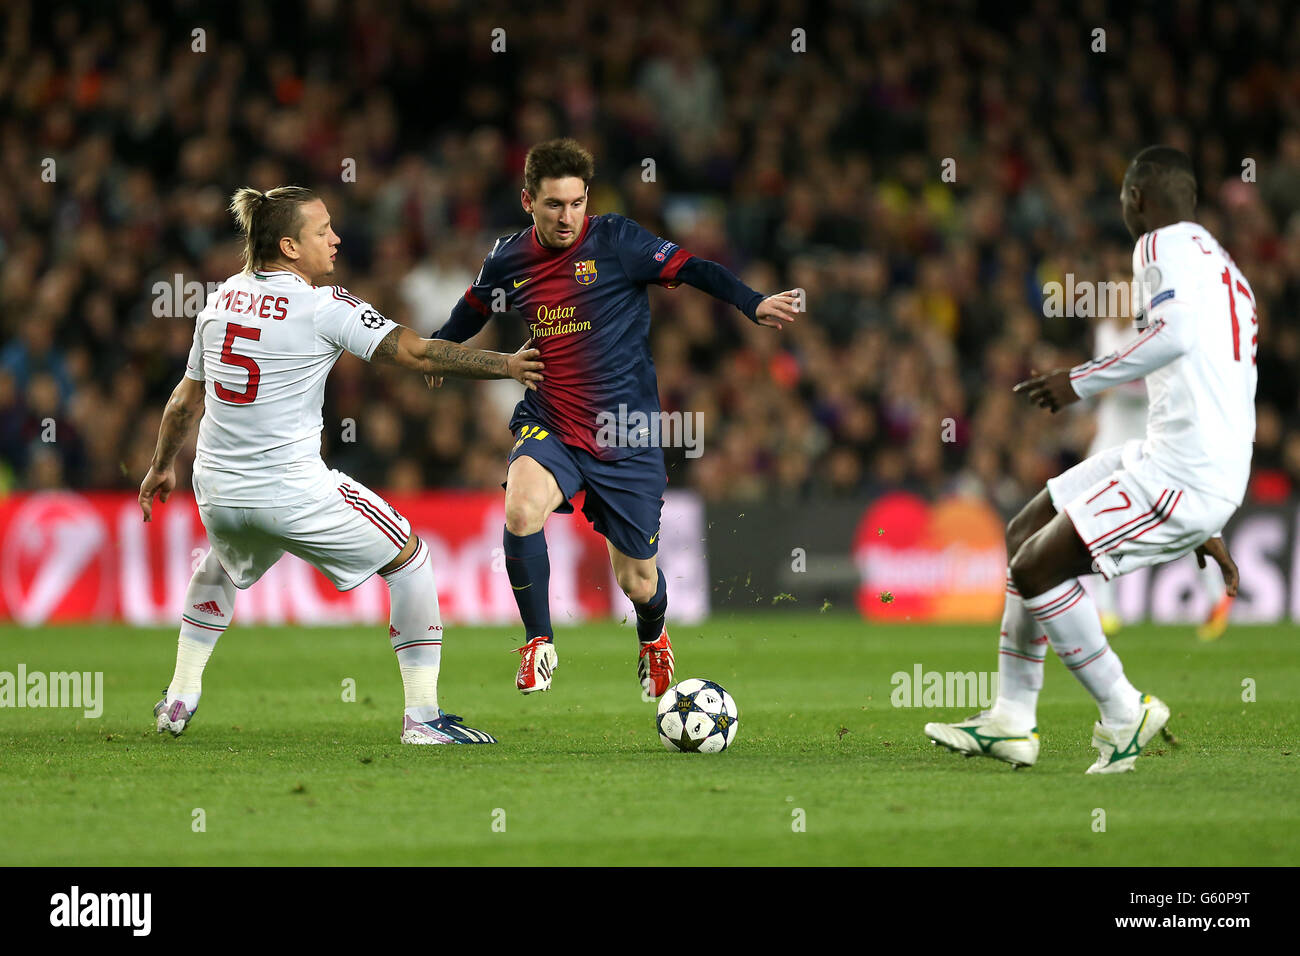 Soccer - UEFA Champions League - Round of 16 - Second Leg - Barcelona v AC Milan - Nou Camp. Barcelona's Messi Lionel Messi takes on AC MIlan's Philippe Mexes (left) and Cristian Zapata (right) Stock Photo